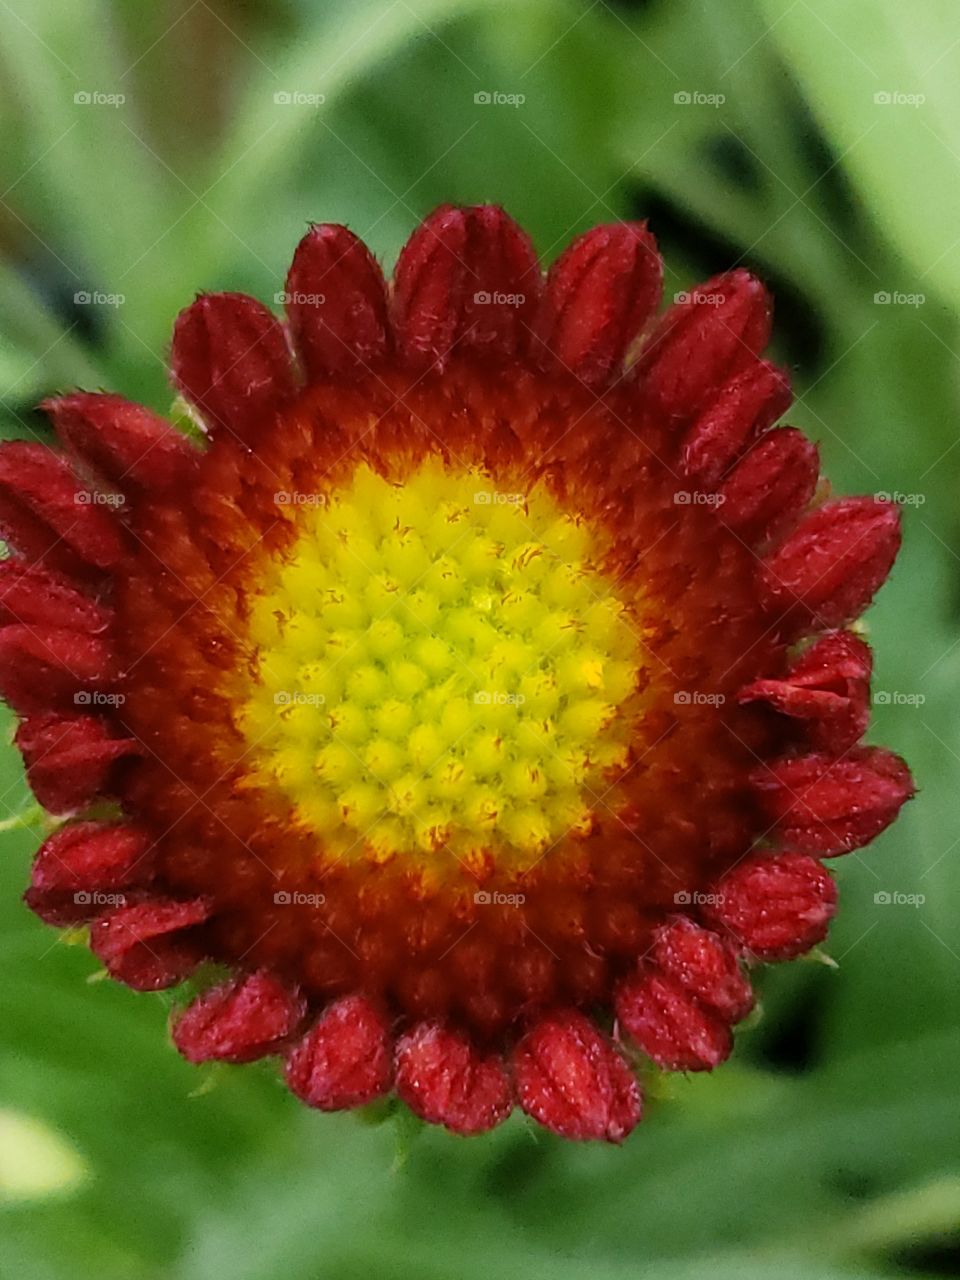 close up of red flower with yellow center